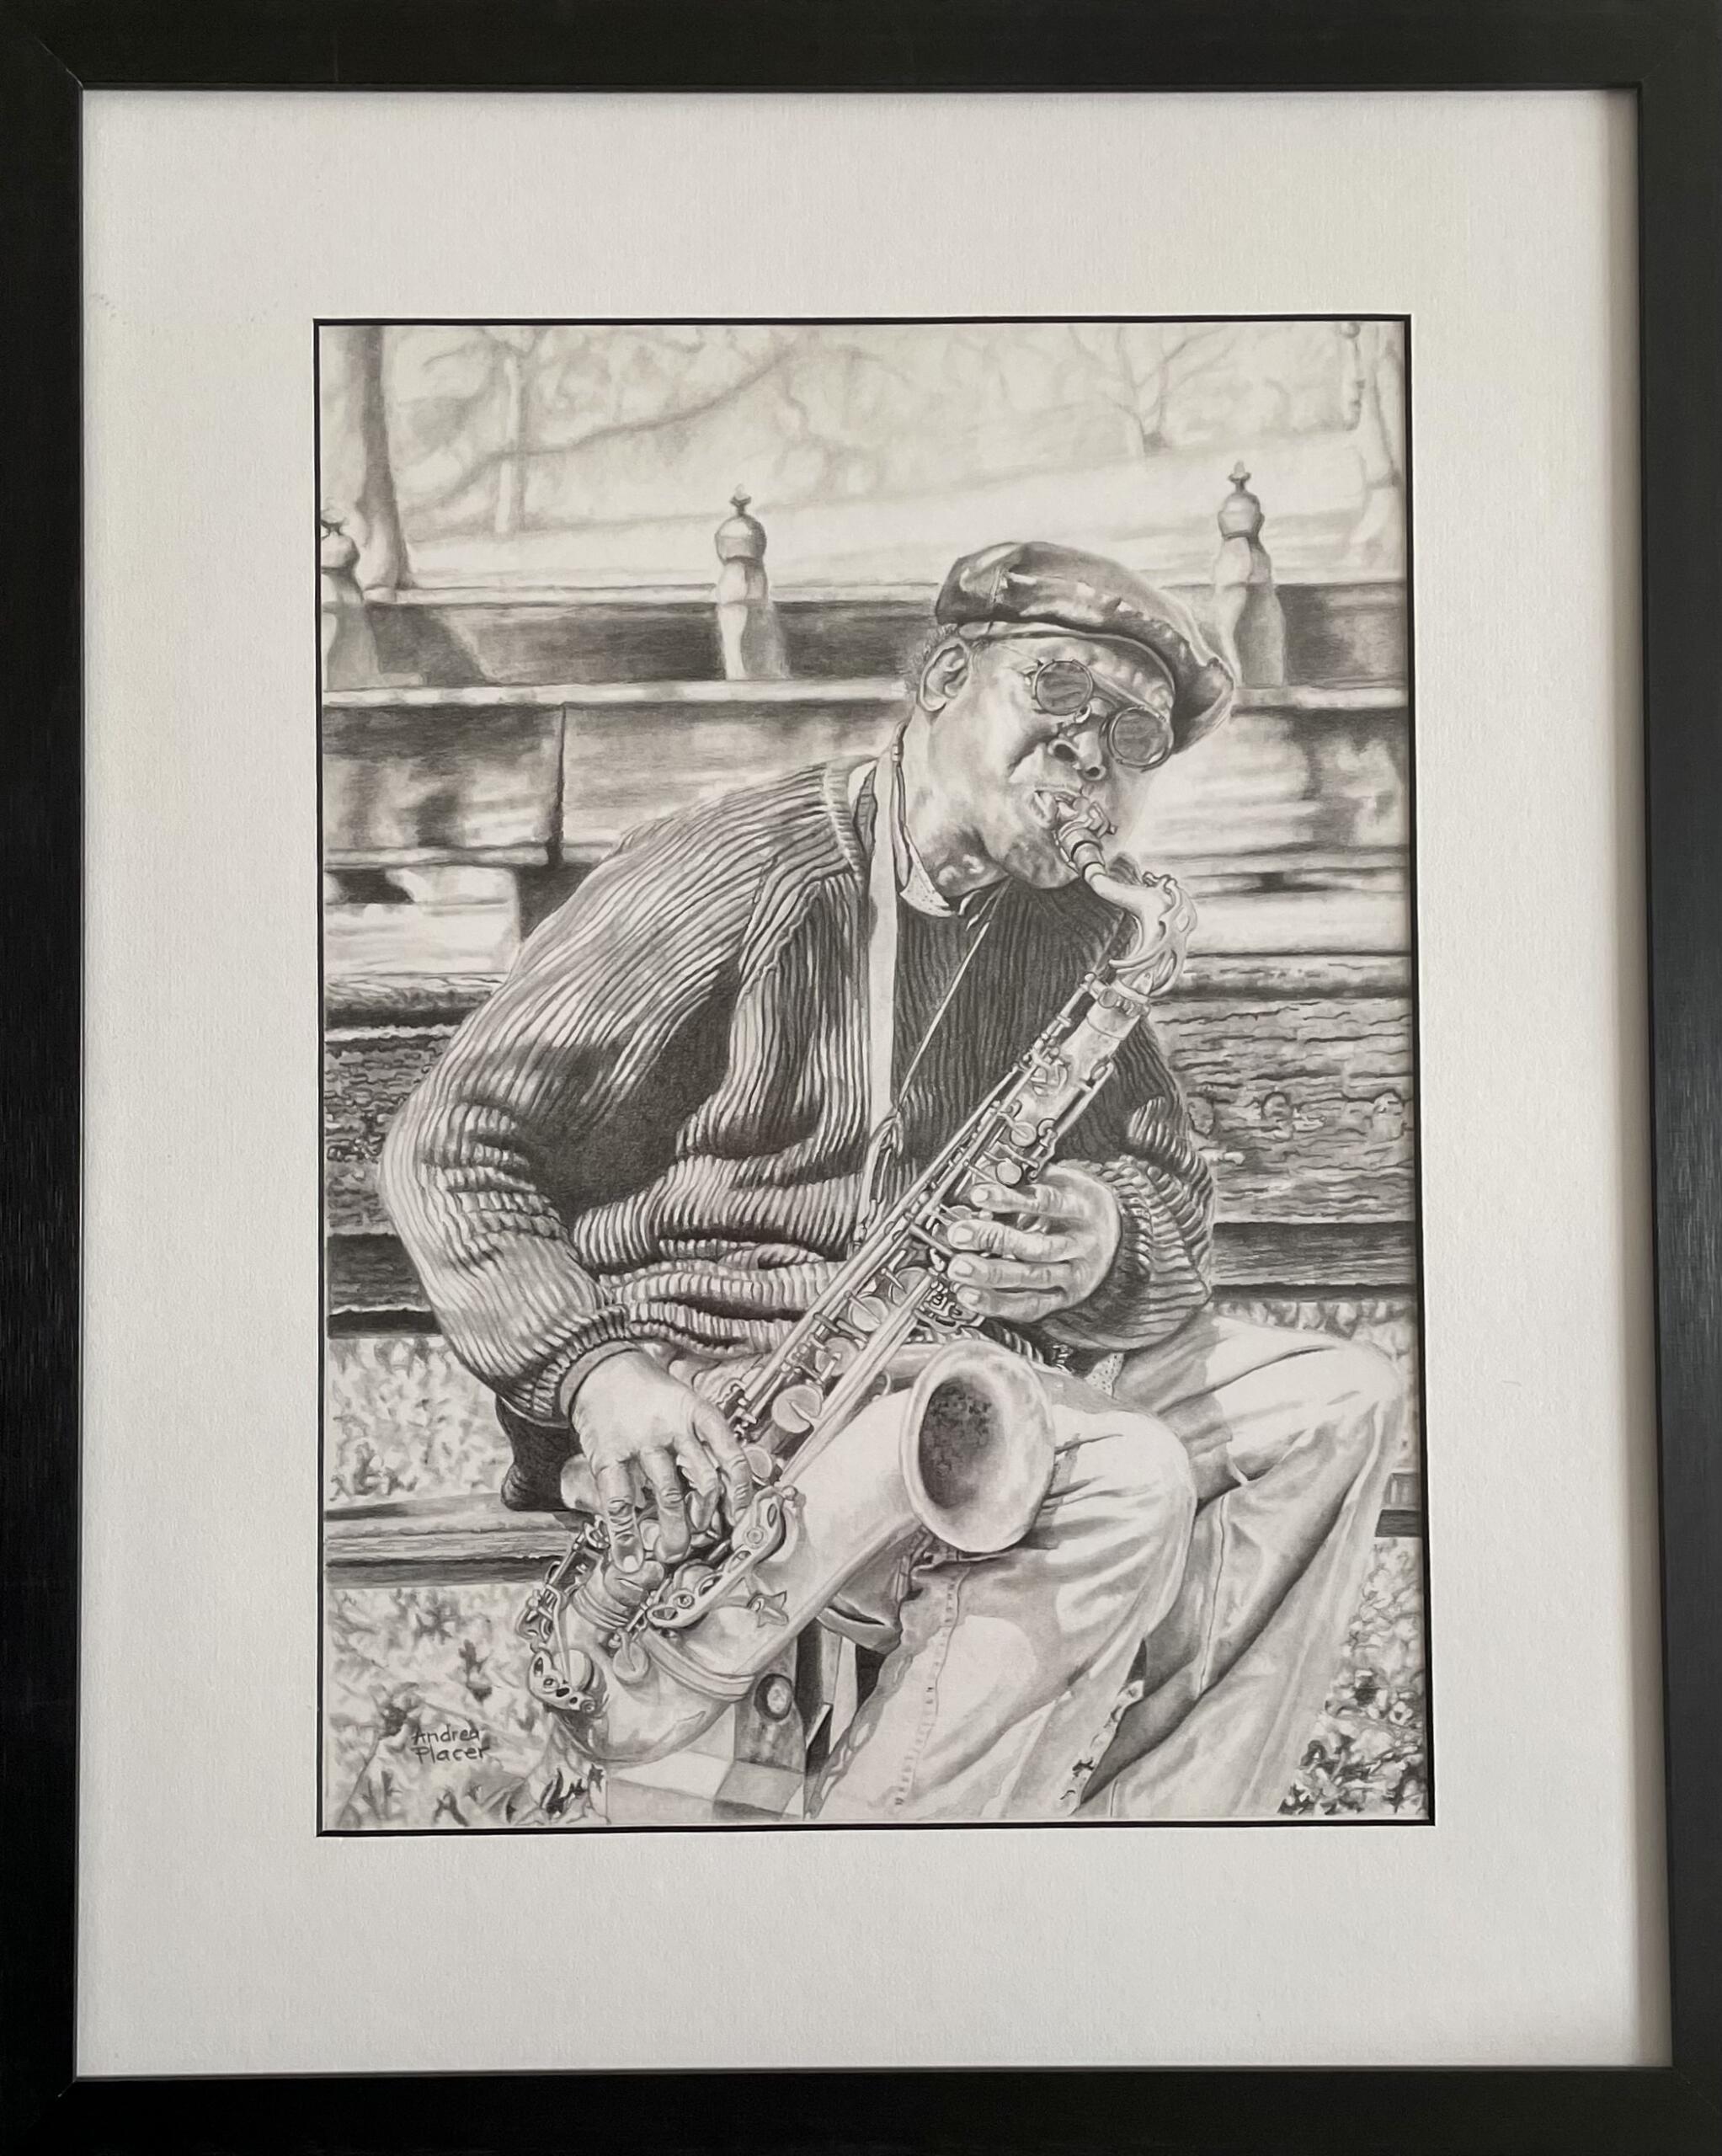 "Blues Man" by Andrea Placer in a white matte framed in black wood.